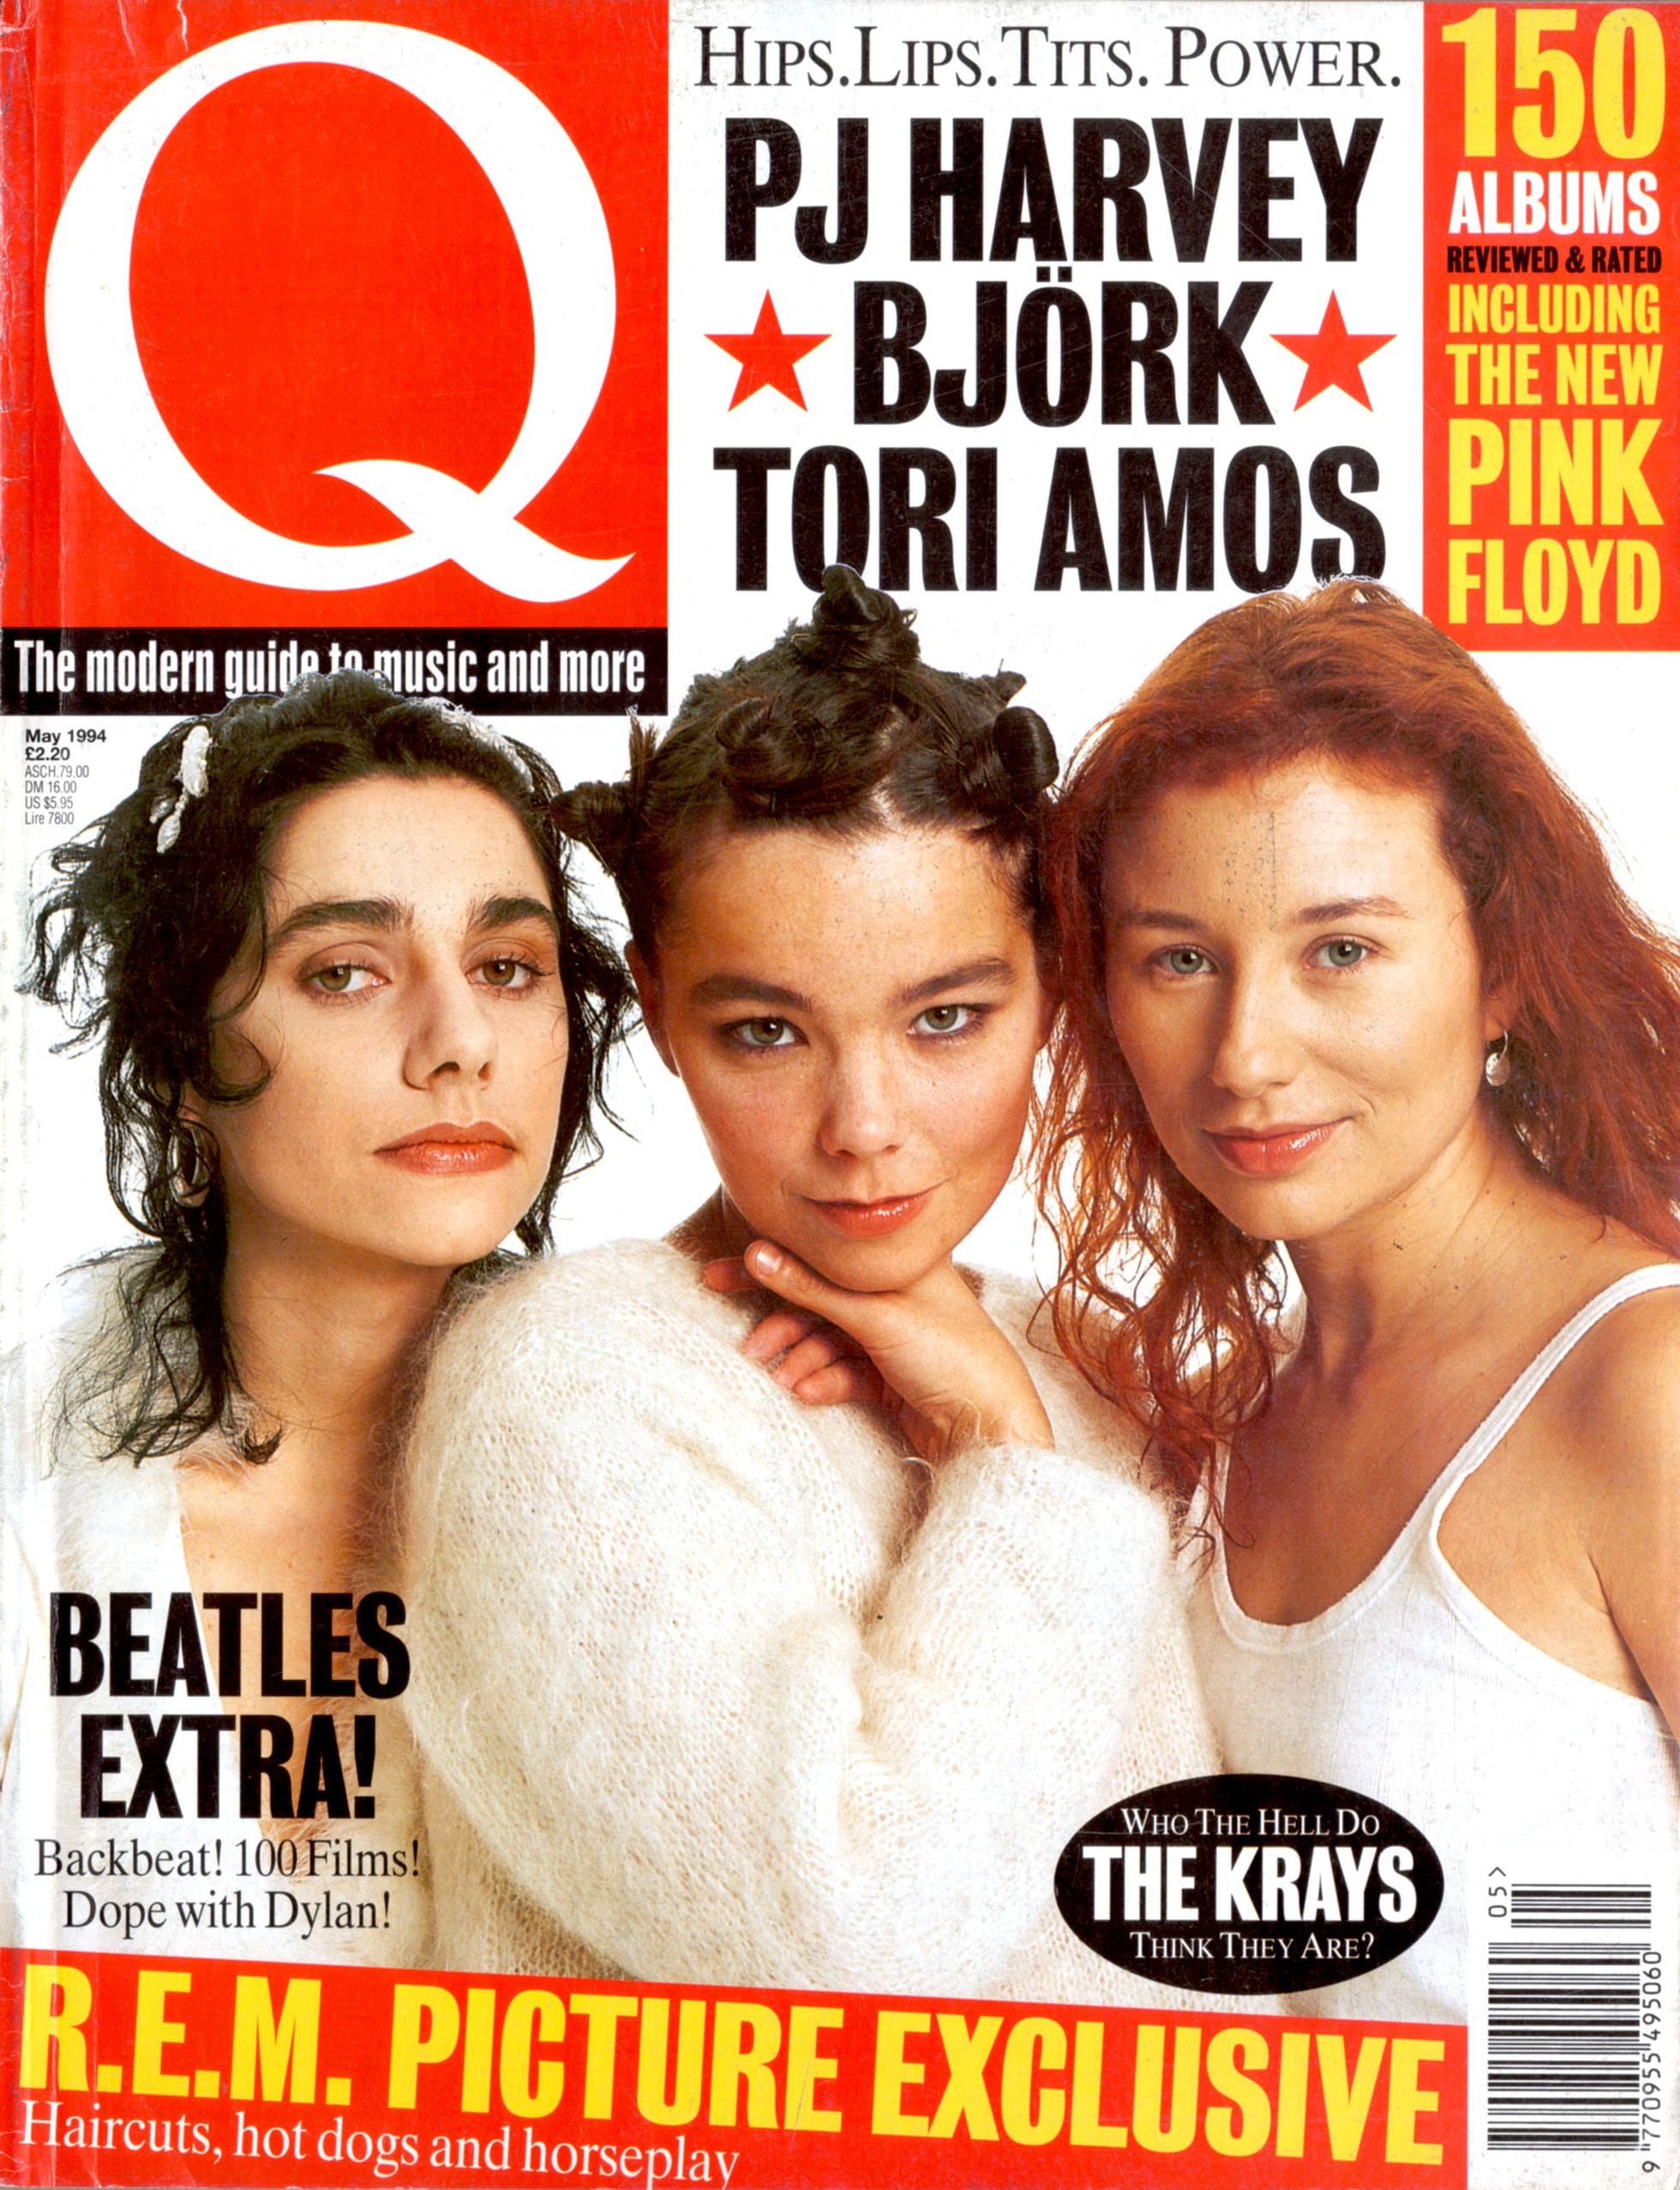 Hips, Lips, Tits, Power': The controversial misogynistic cover that angered  Tori Amos, PJ Harvey and Björk, Culture